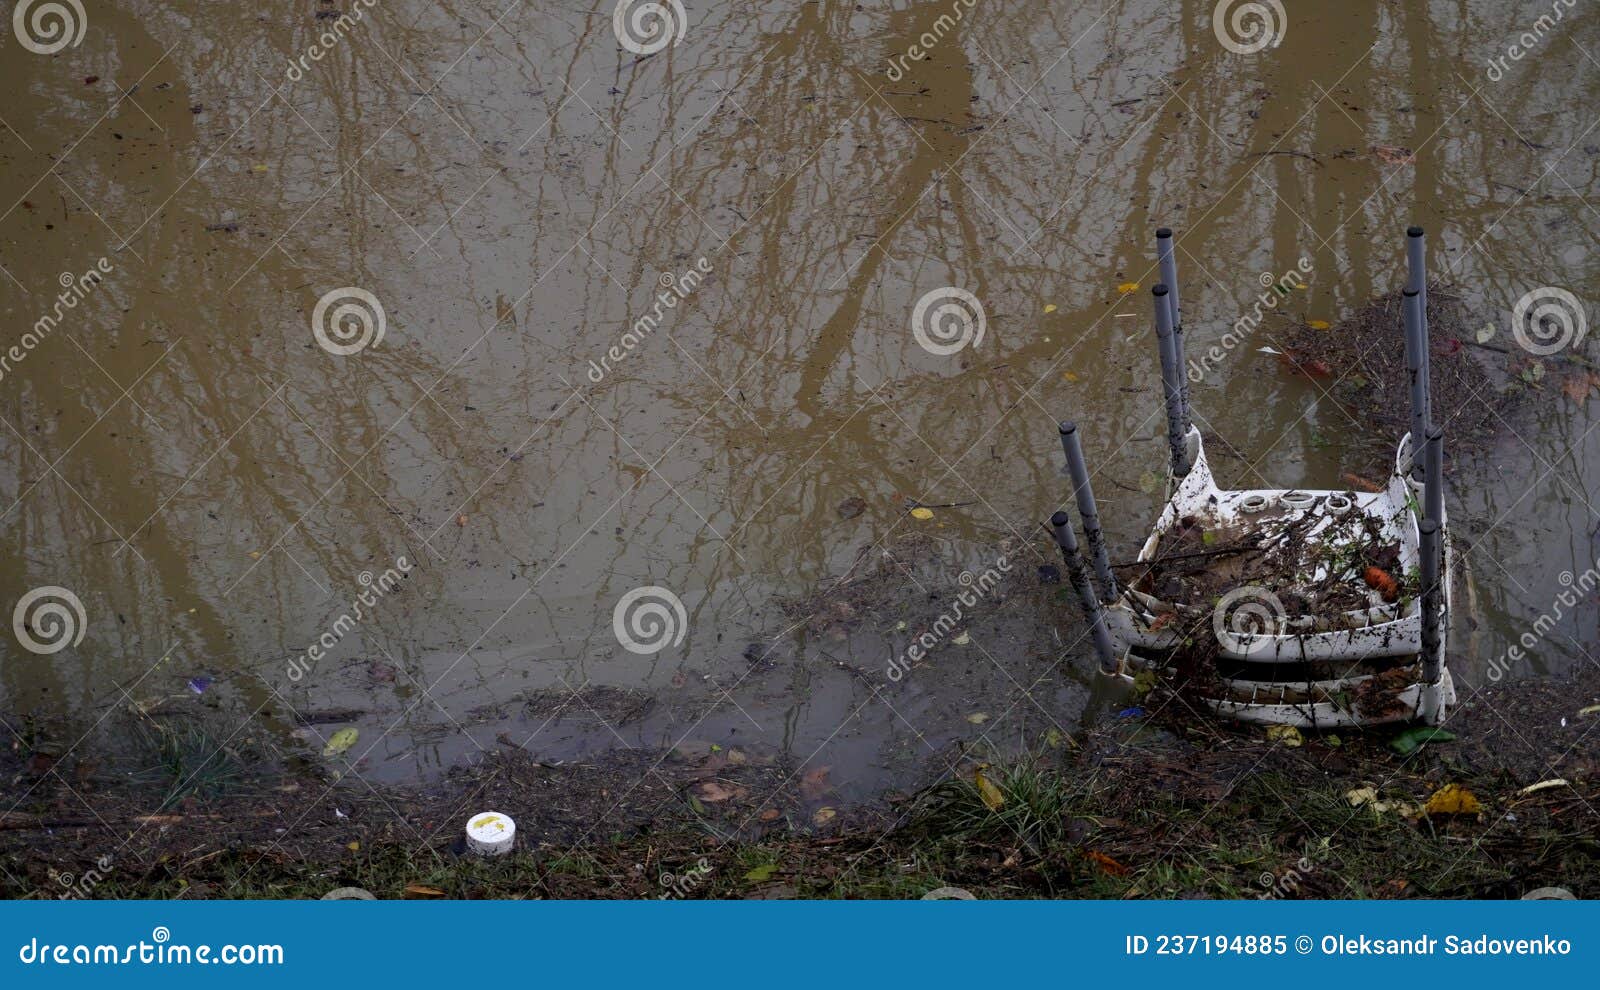 plastic chair lies in water, background image